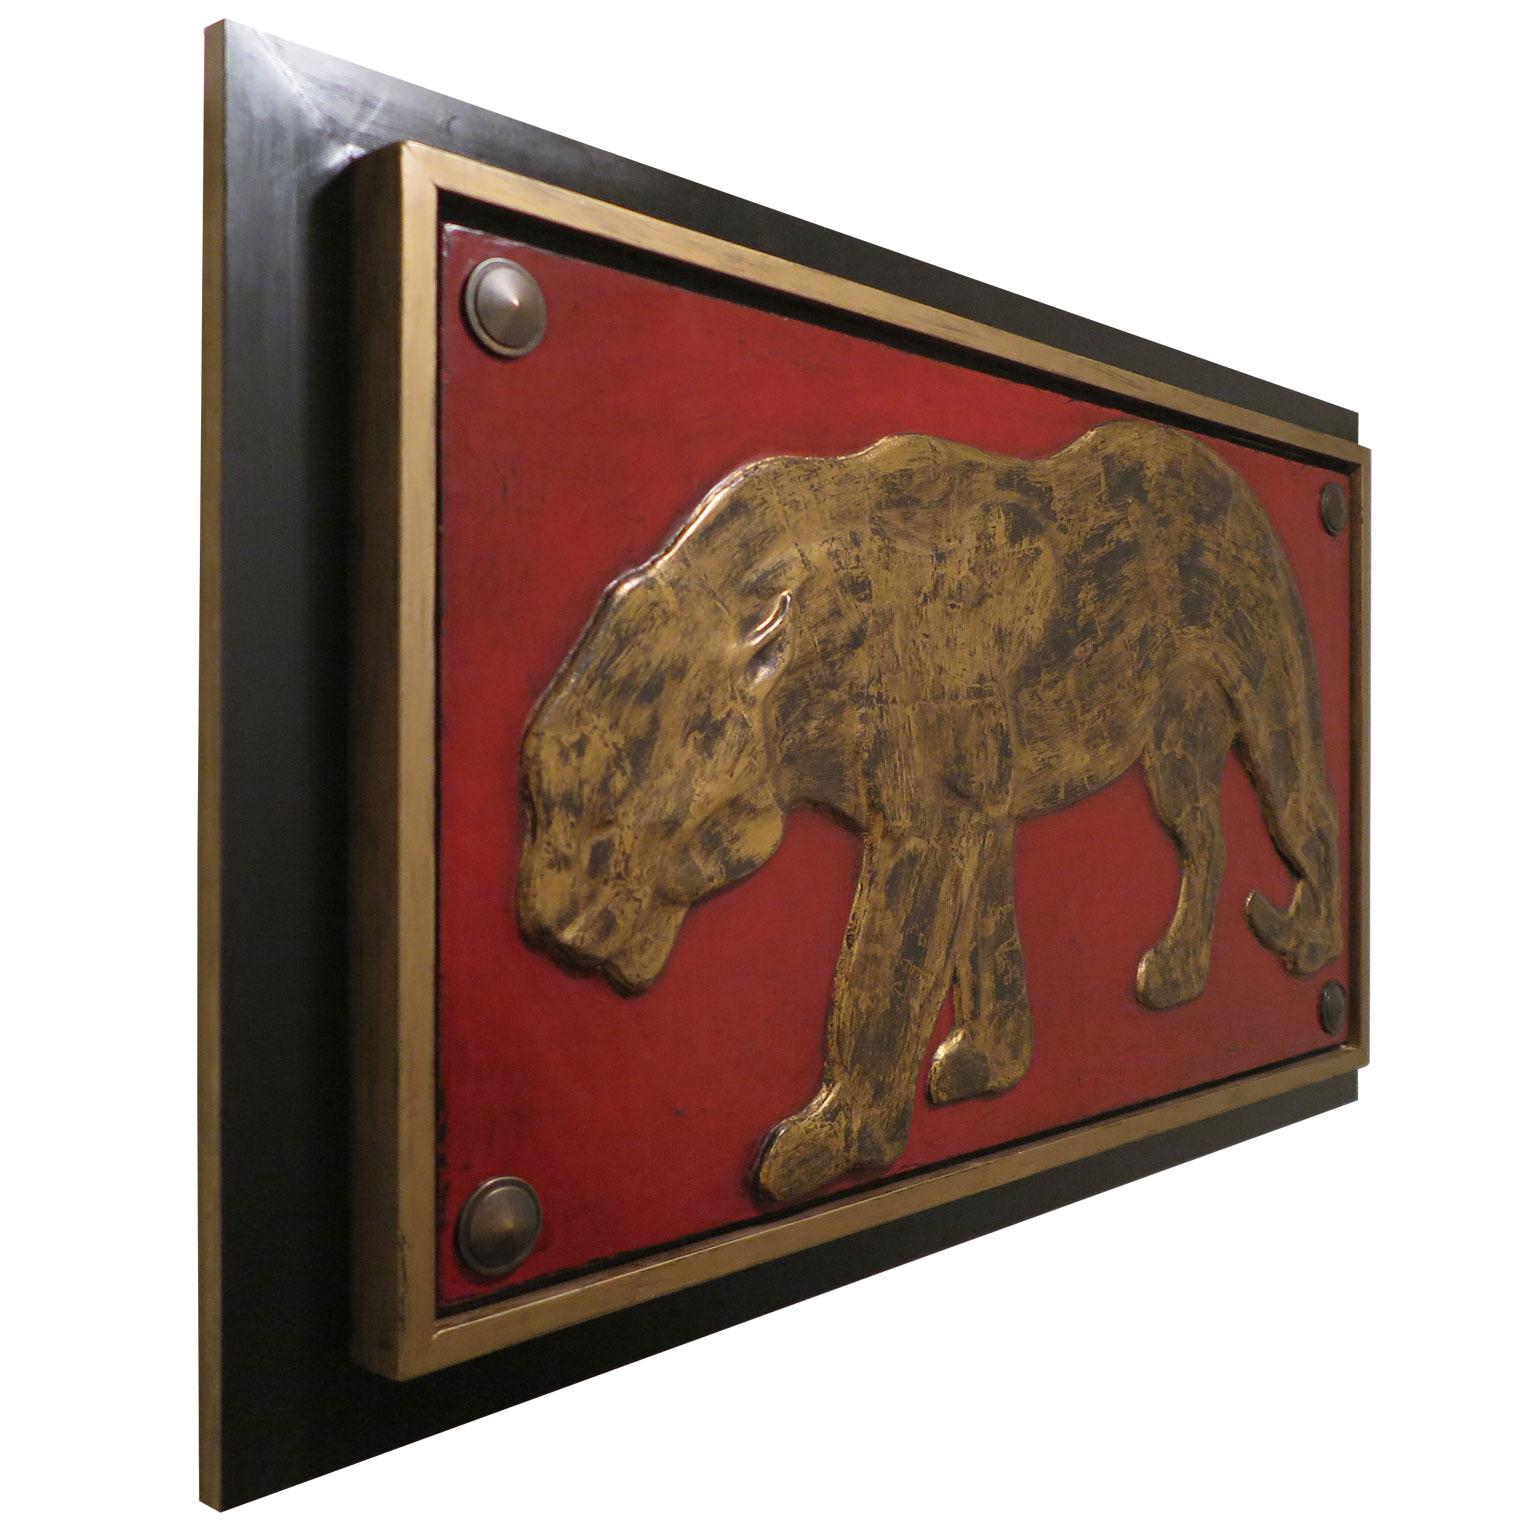 Raised relief carving of panther applied with distressed gold leaf. China red painted background with pointed pyramid style ornamentation in each corner. Gold and black matte frame.